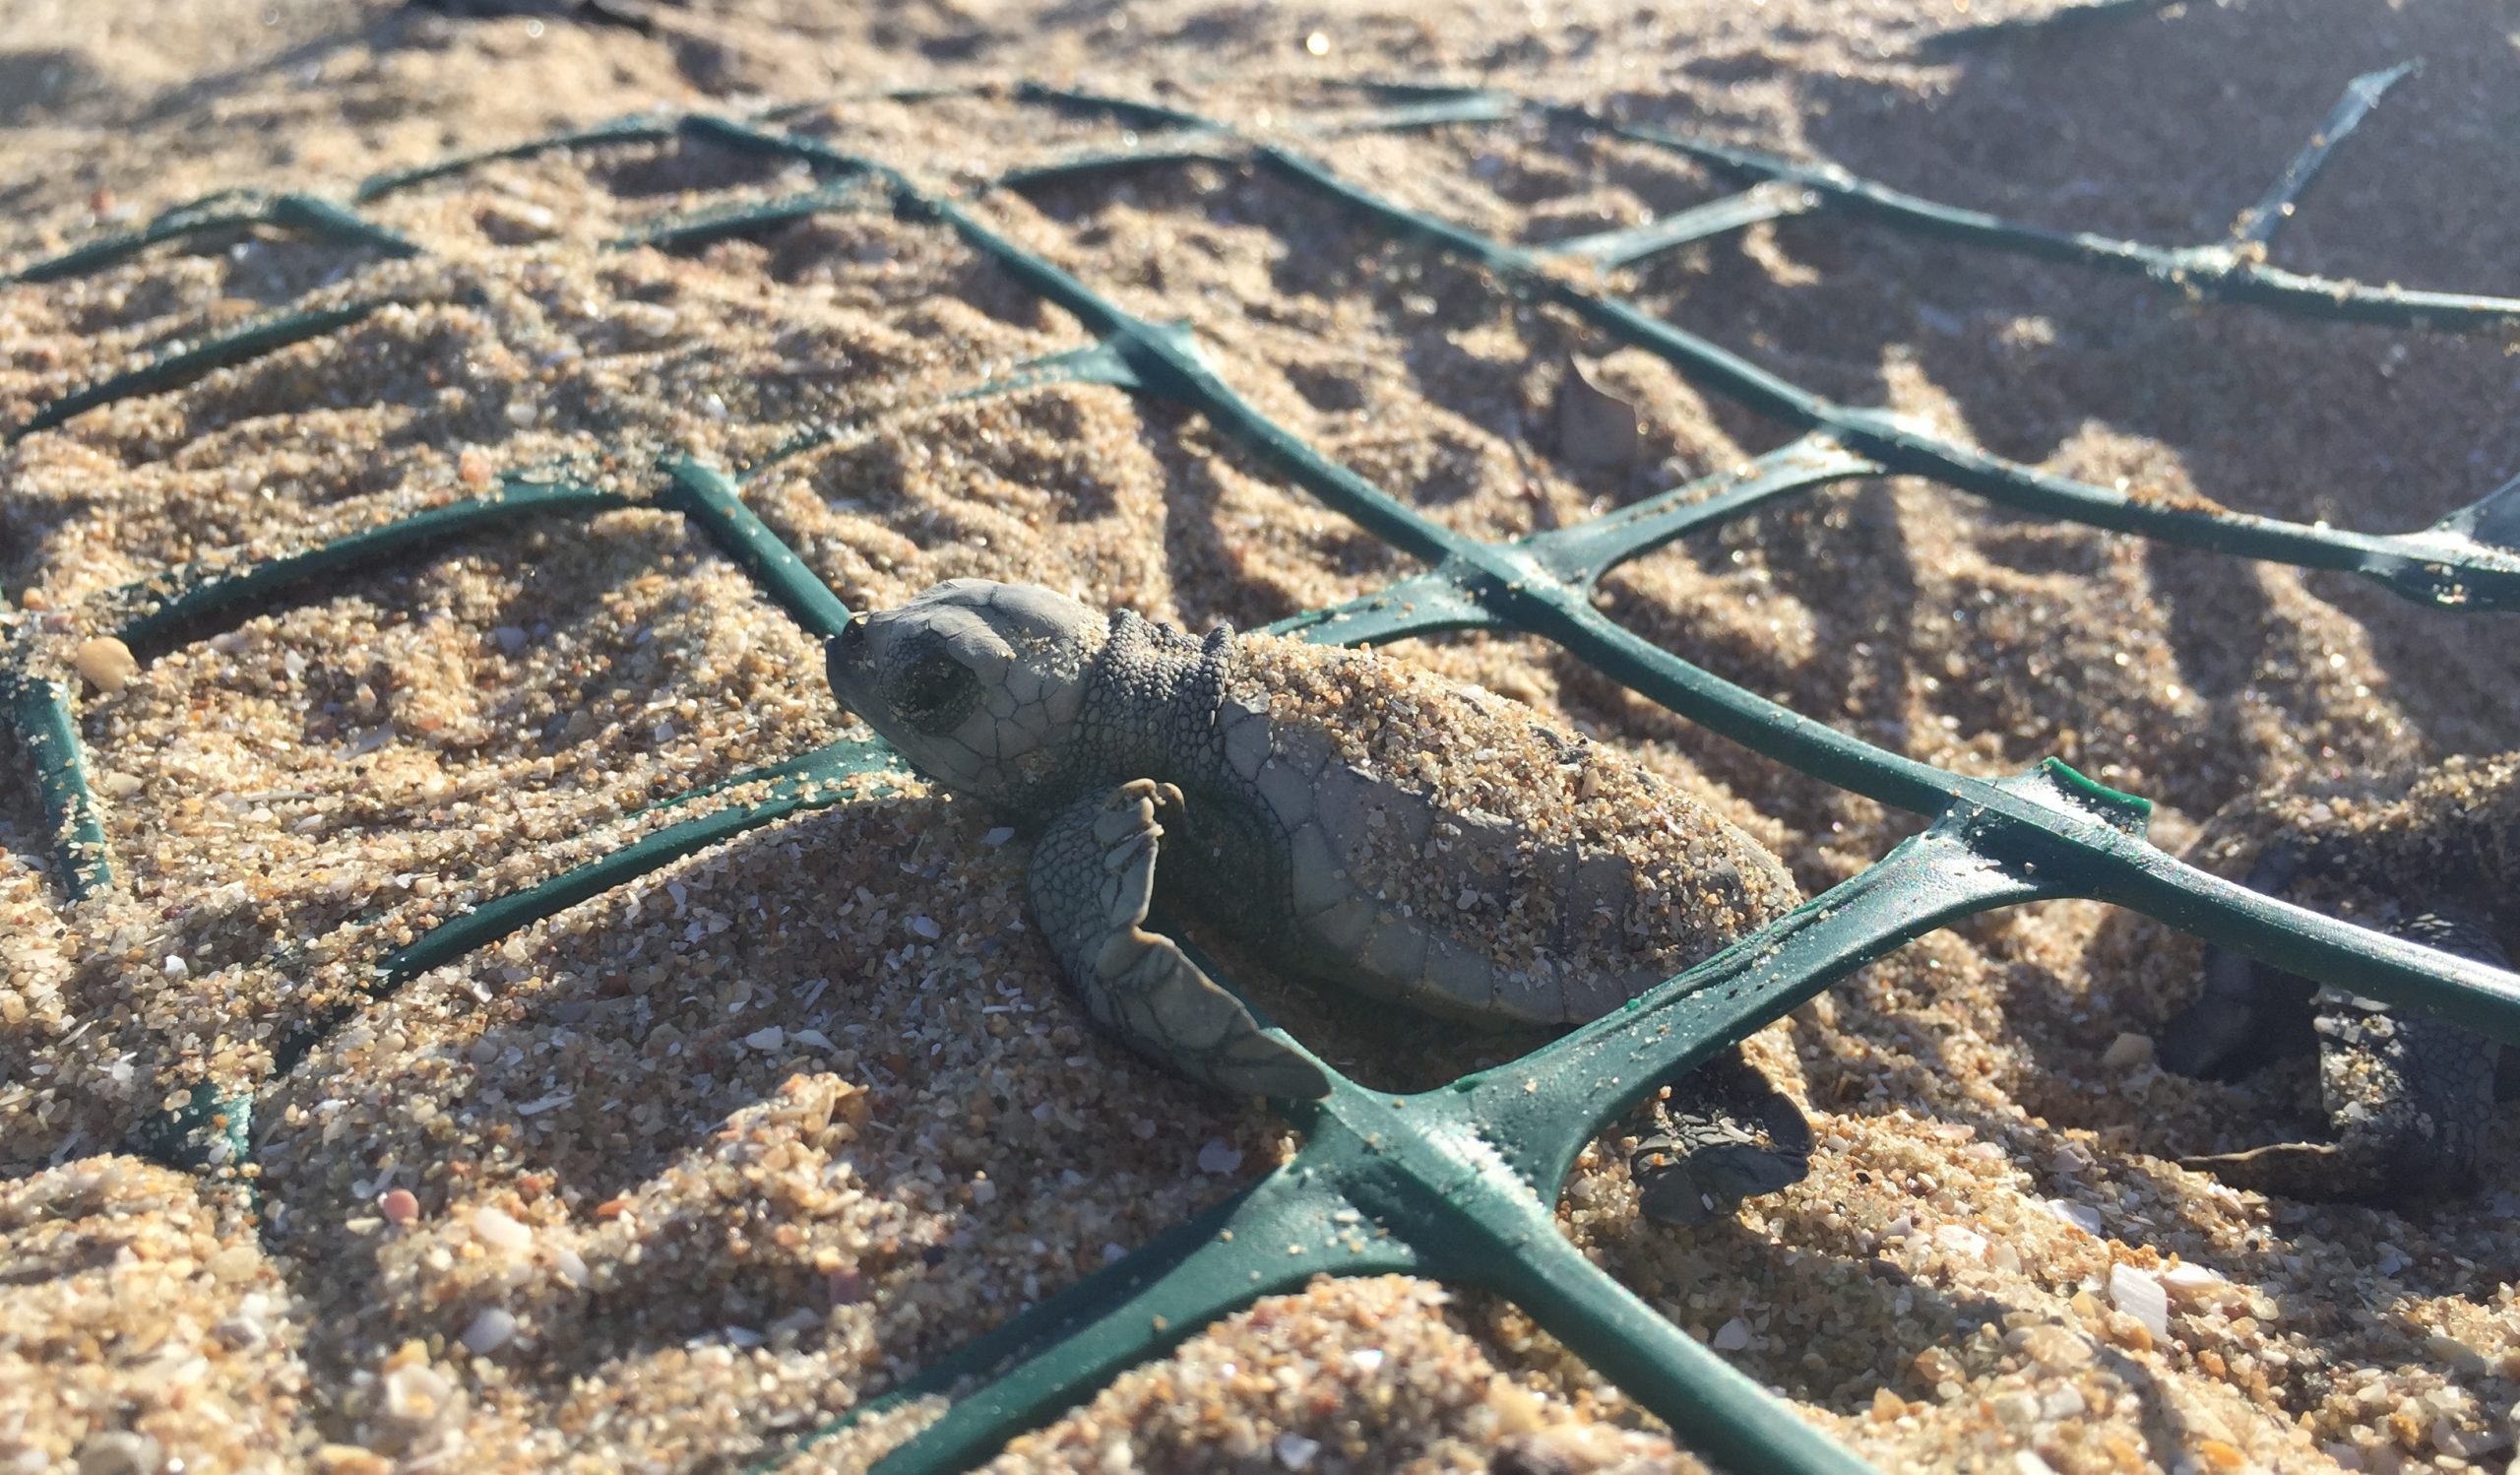 Image of turtle in protective netting